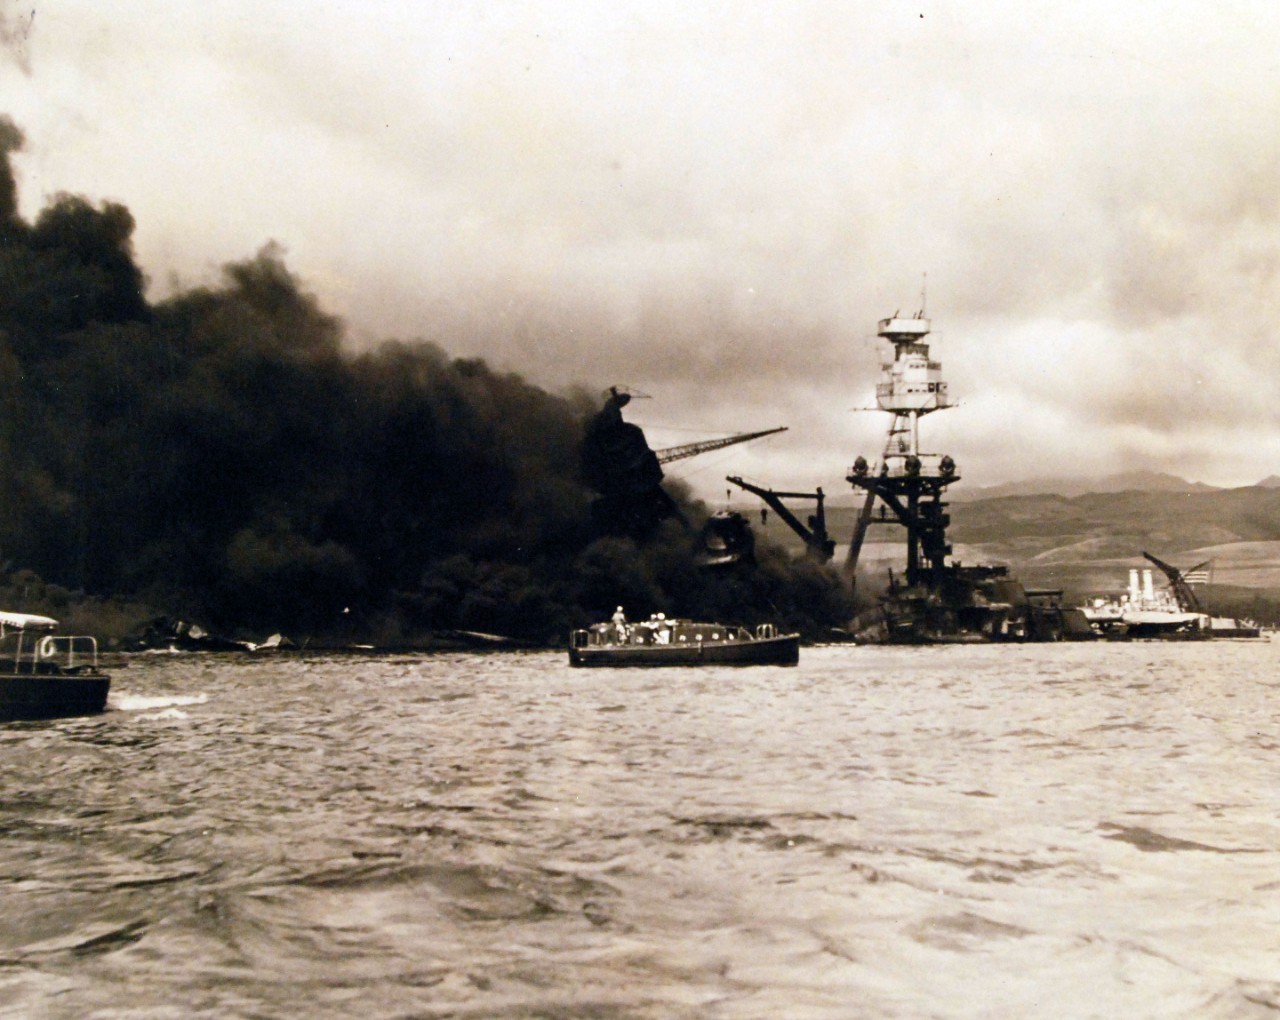 80-G-413513:  Pearl Harbor Attack, 7 December 1941.  USS Arizona (BB 39) during the attack. Note, the motor whale boat in the center of the photograph looking for survivors. U.S. Navy photograph, now in the collections of the National Archives.         (9/29/2015).